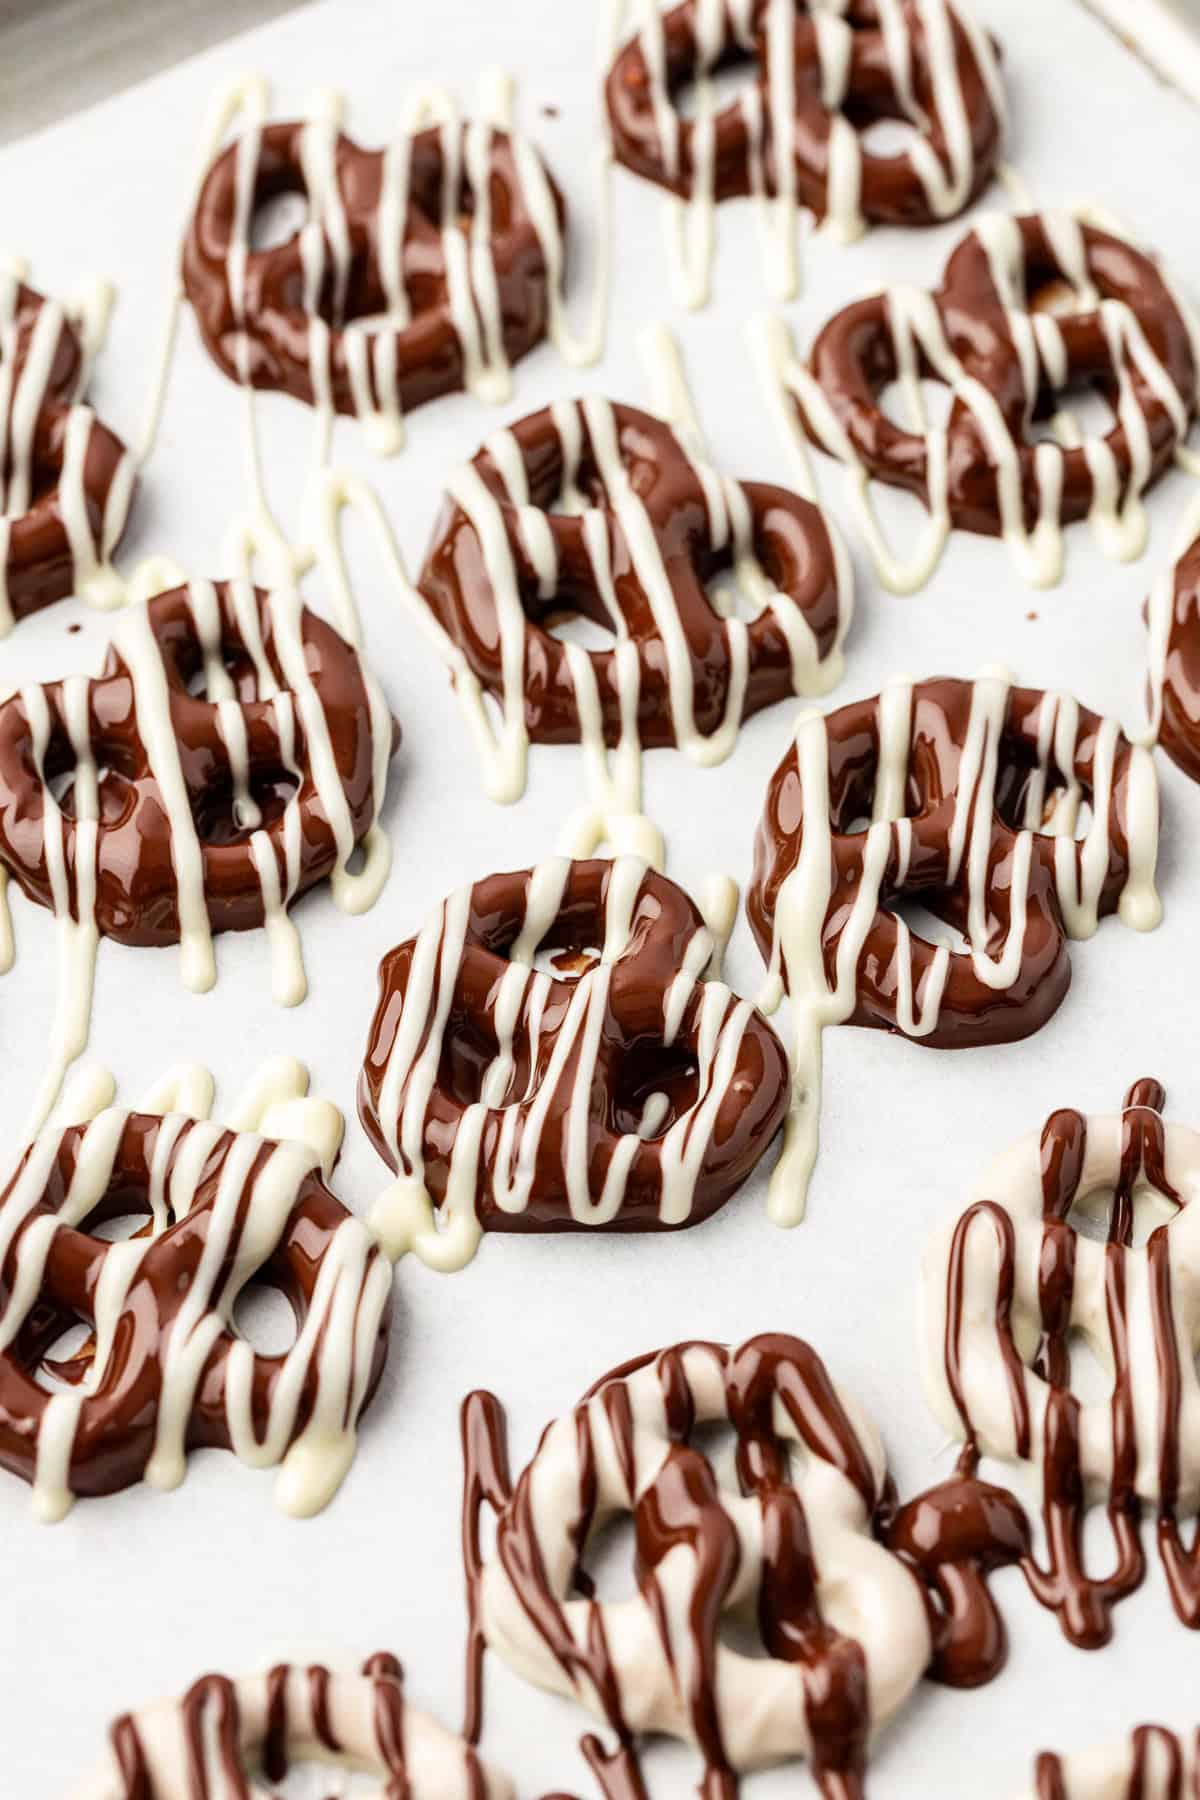 rows of twist pretzels on a baking sheet coating in chocolate and drizzled with white chocolate, with some rows coated in white chocolate and drizzled with chocolate